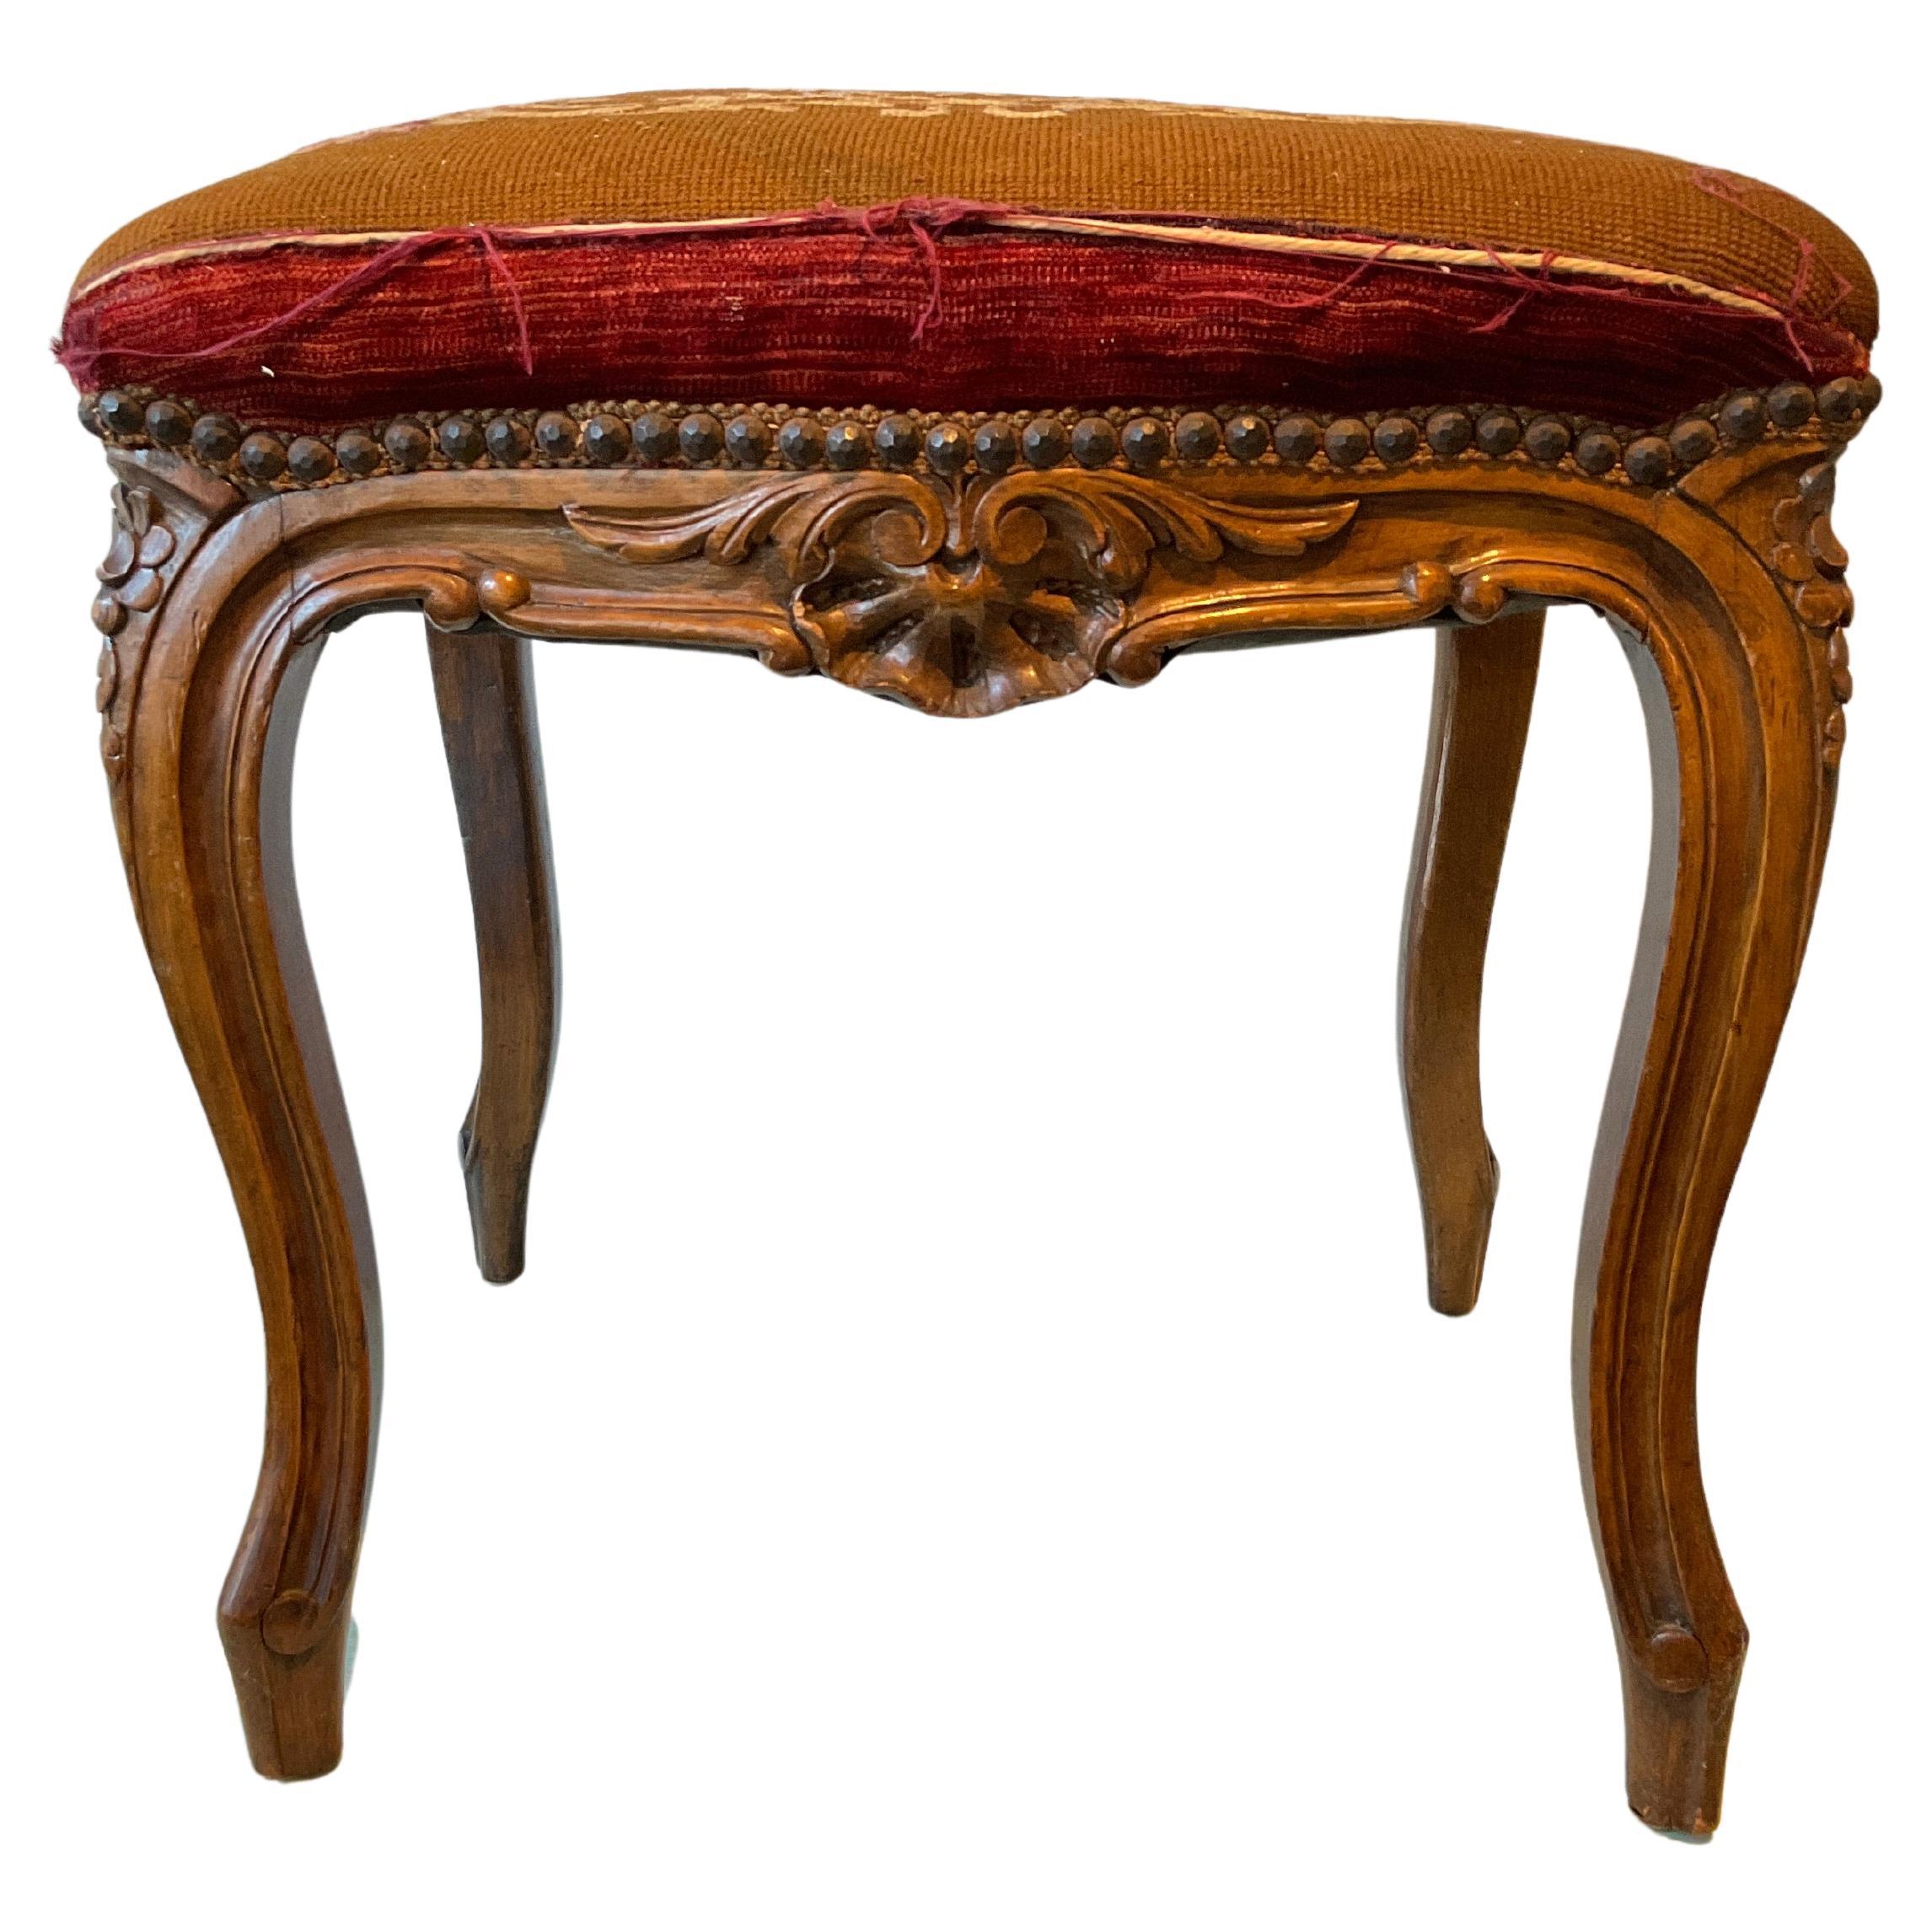 1930s Carved Wood French Footstool With Cabriolet Legs For Sale